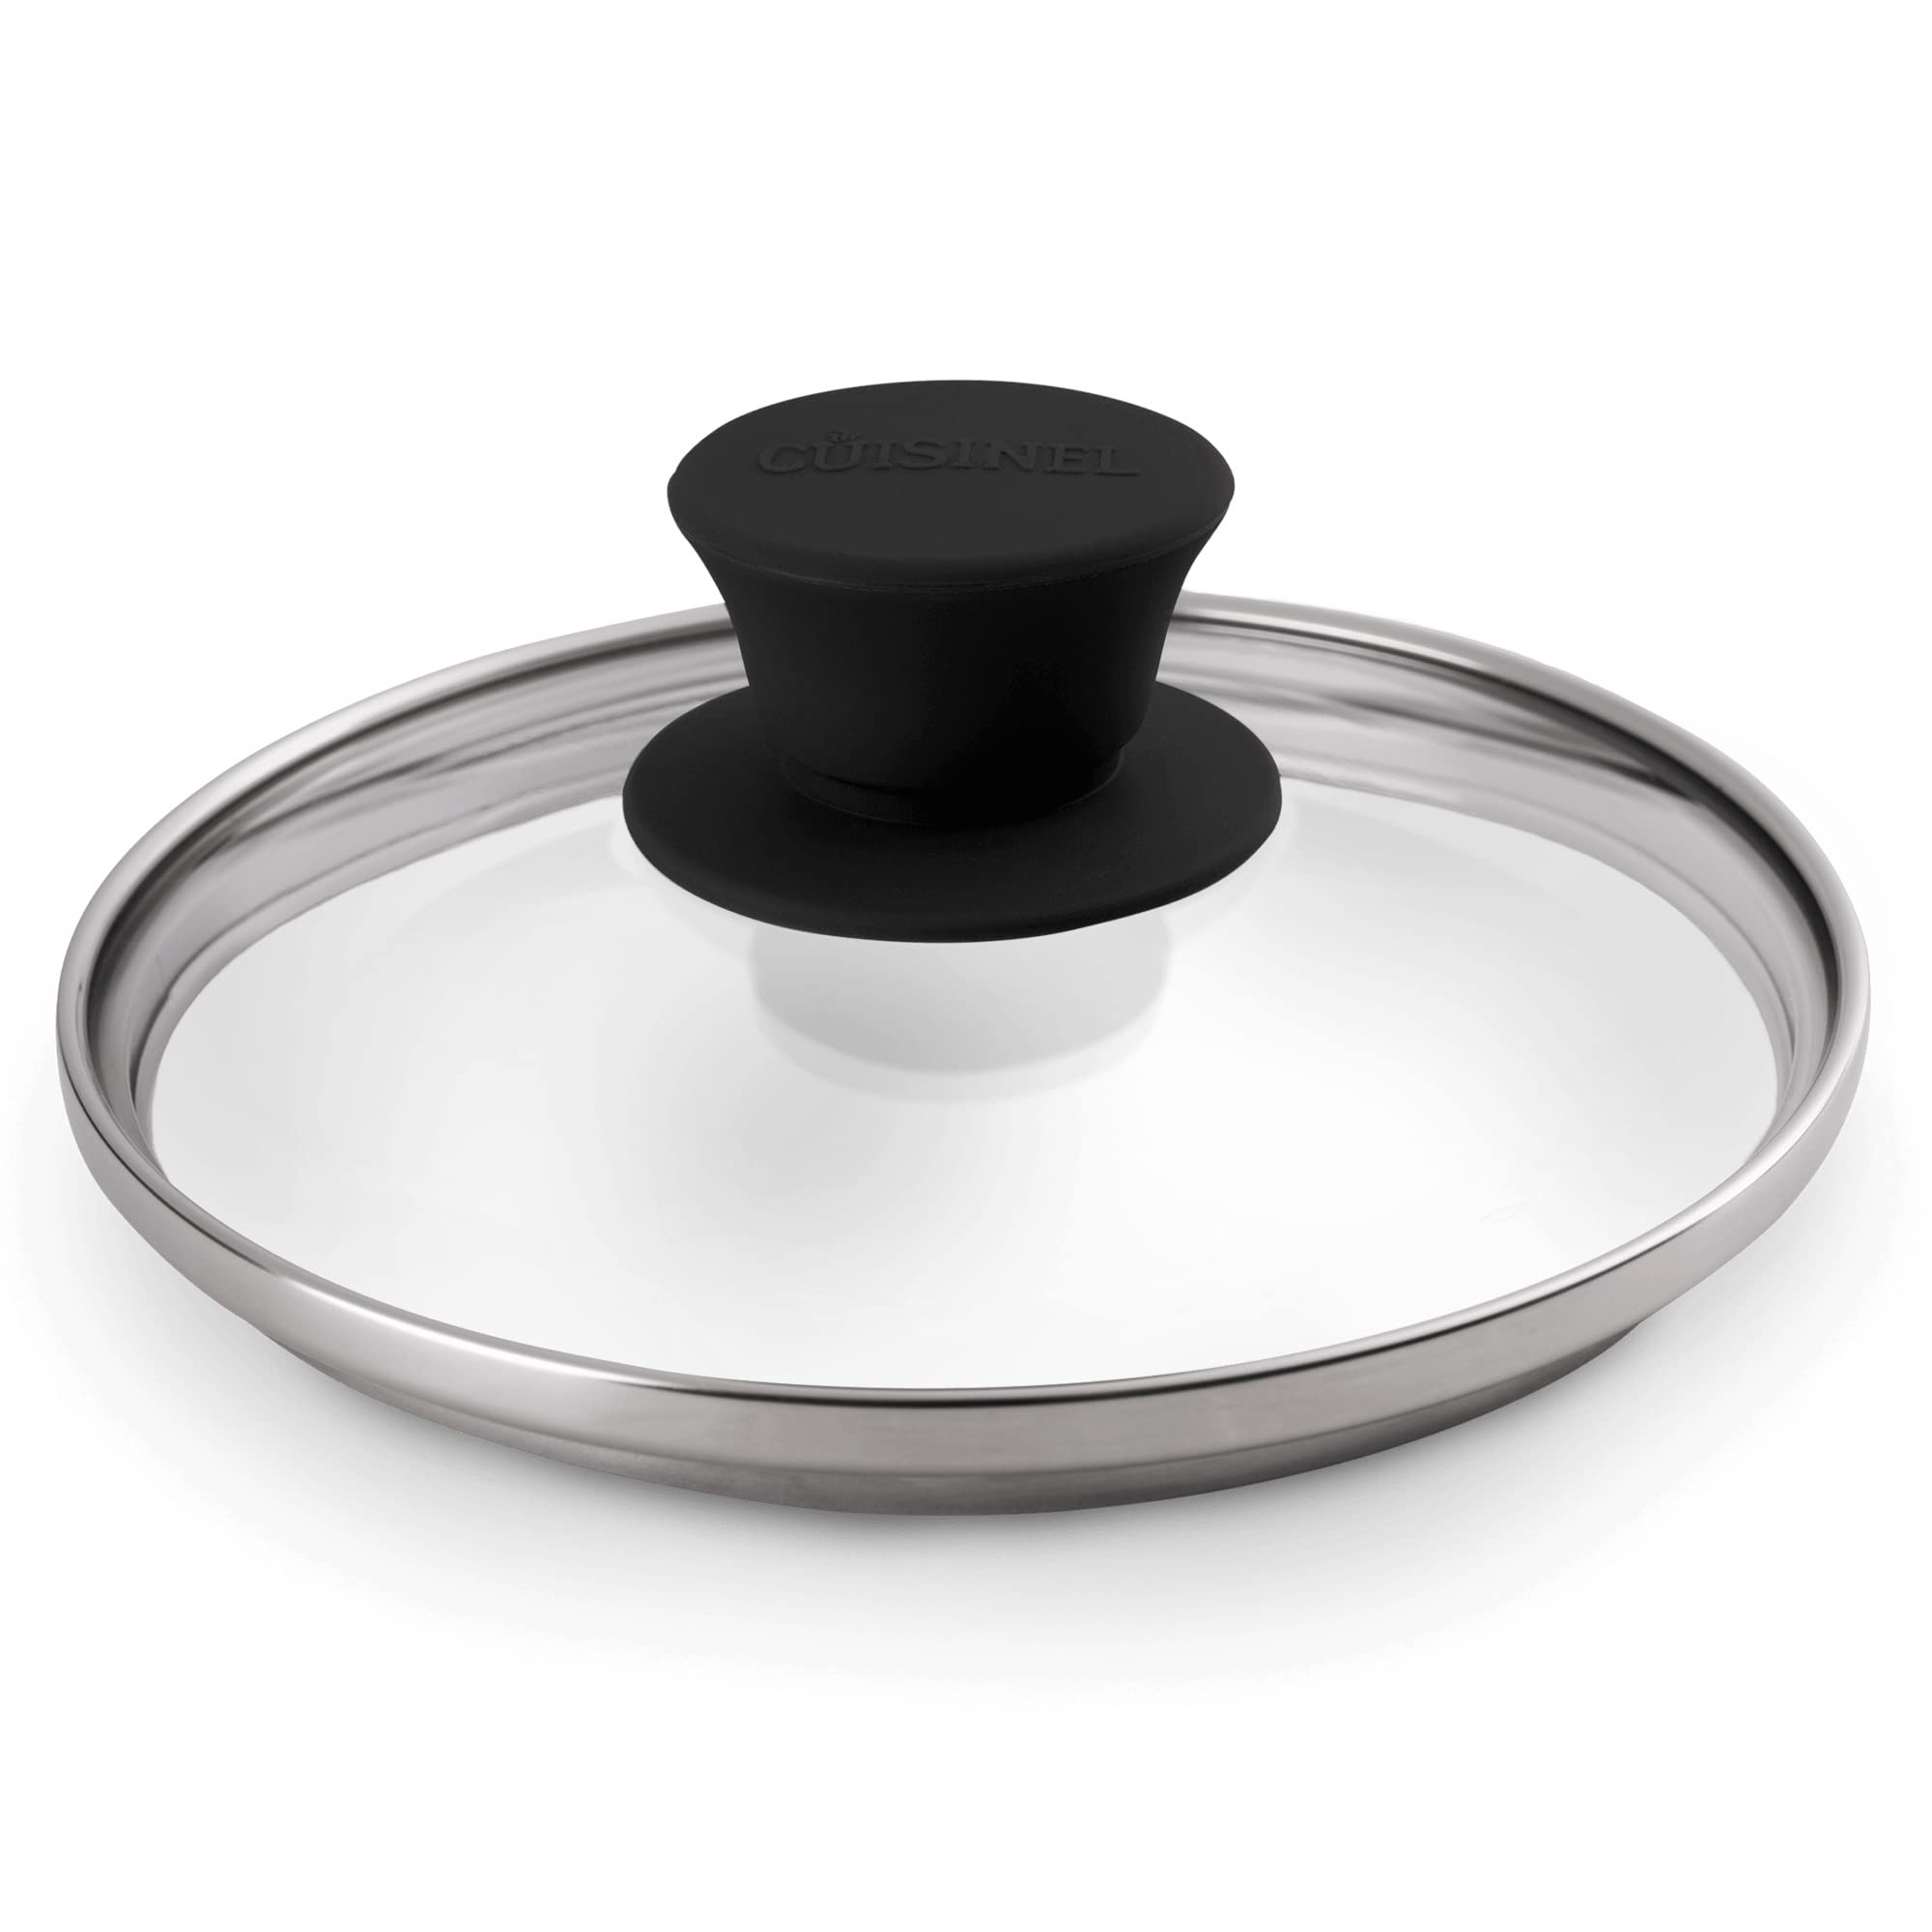 Cuisinel Cast Iron Skillet Glass Covers with Steam Vent Hole - Fits Lodge - Lids for All Universal Cookware  - Acceptable